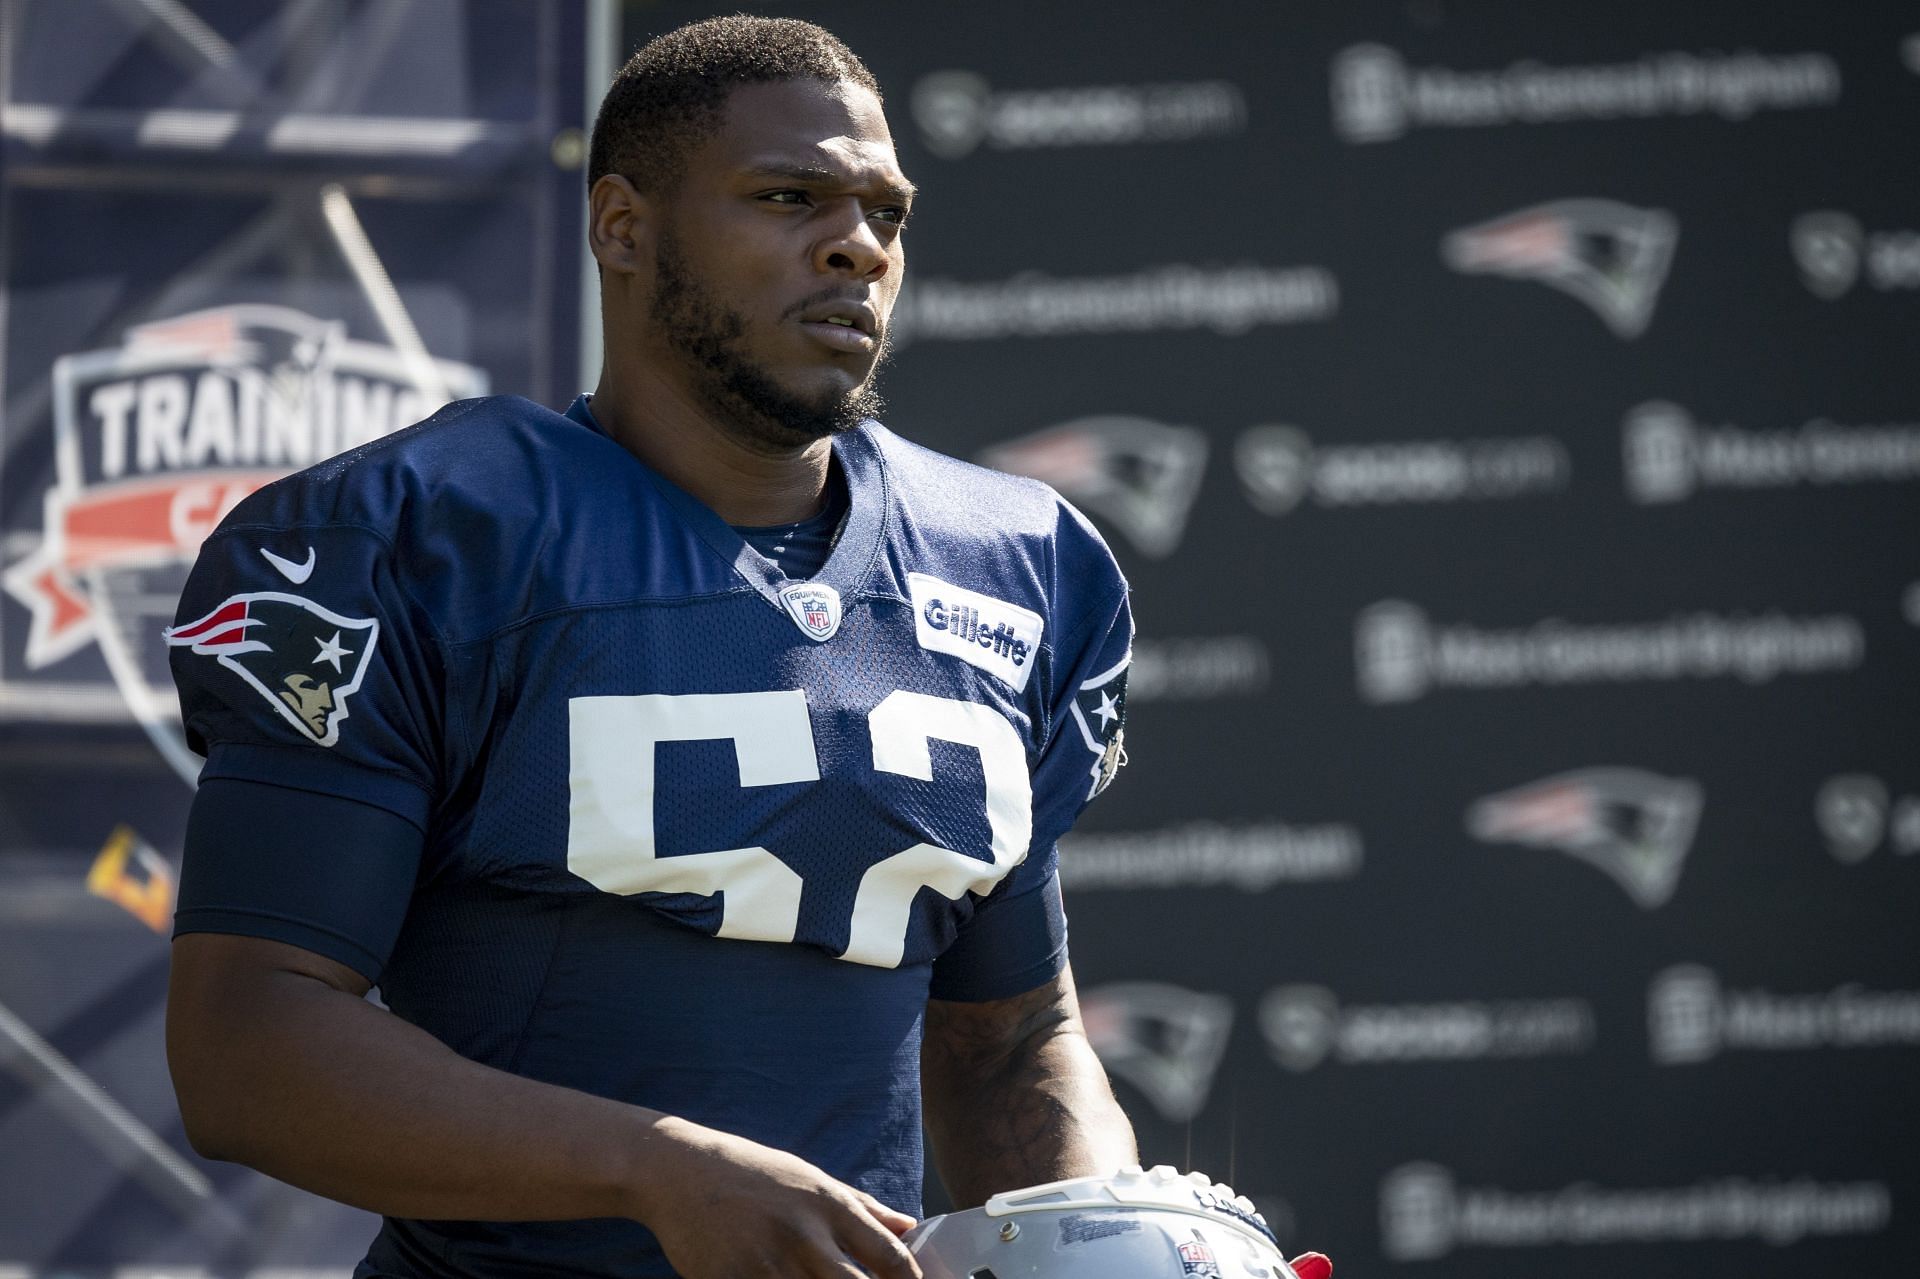 Ronnie Perkins at New England Training Camp